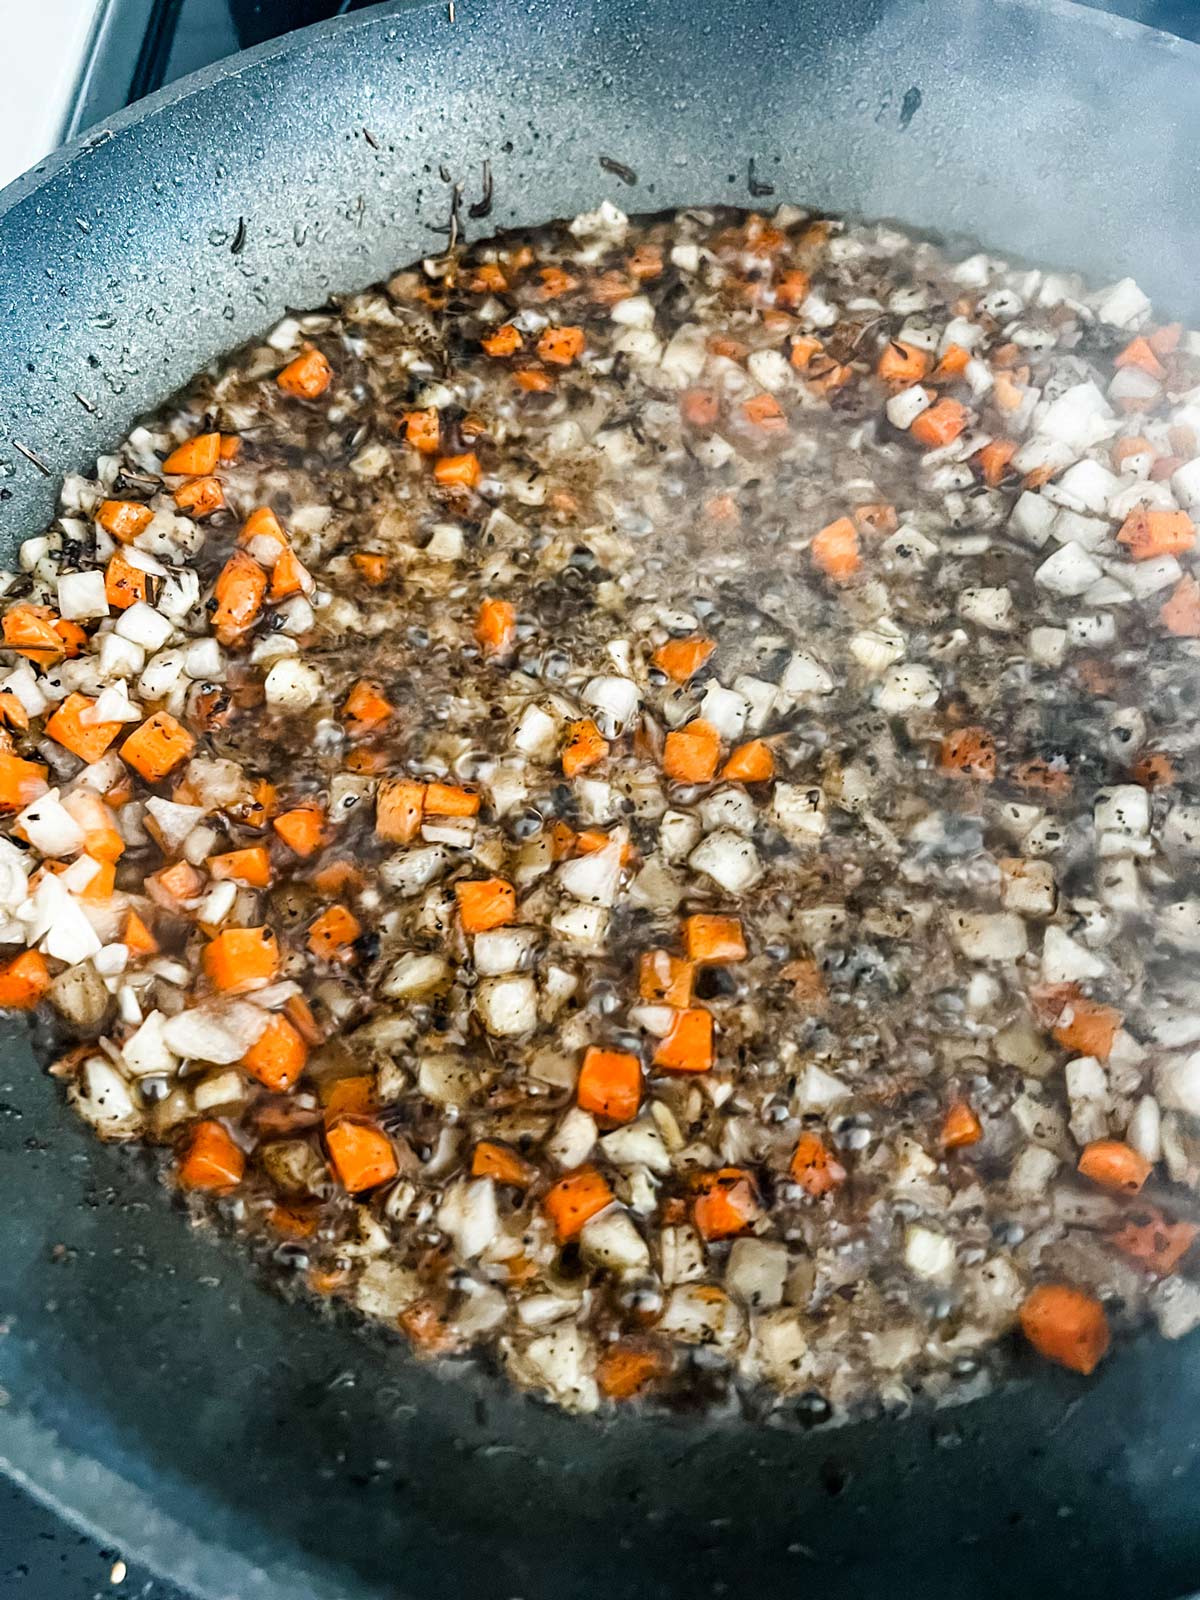 Diced vegetables sauteeing in the rendered fat from beef ribs.